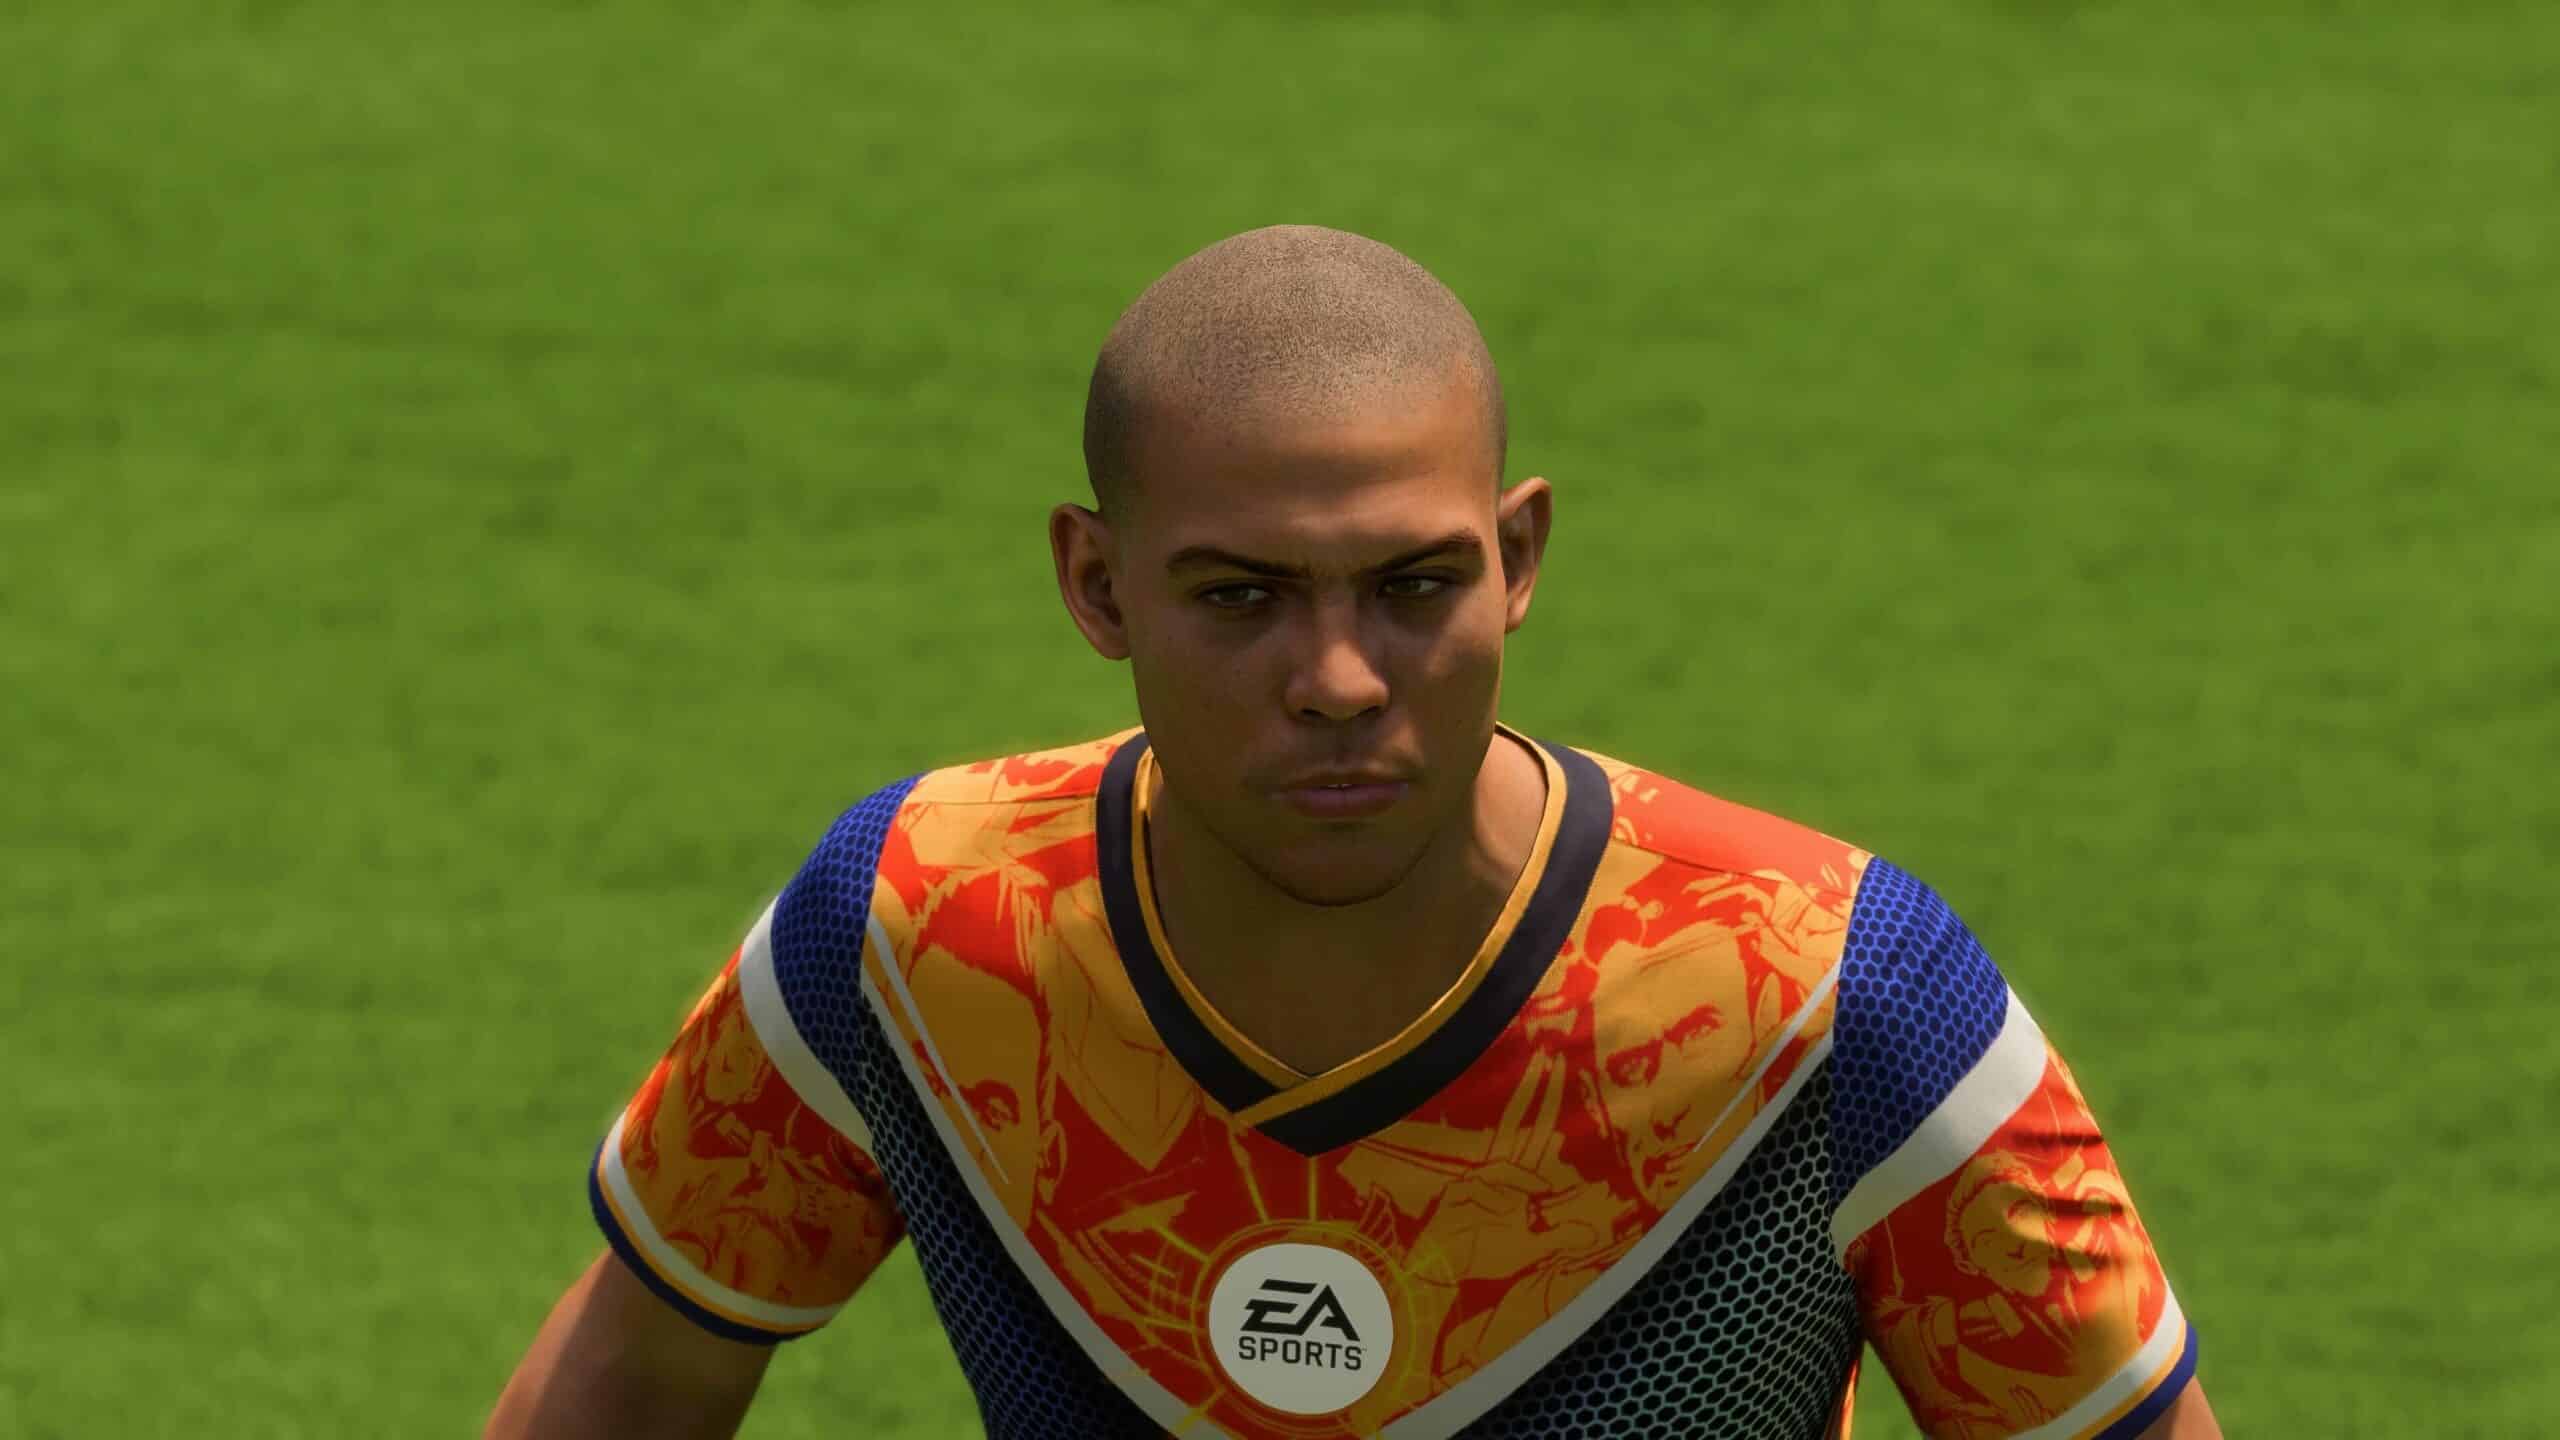 EA Sports FC 24: Will Ronaldo Be In The Game?